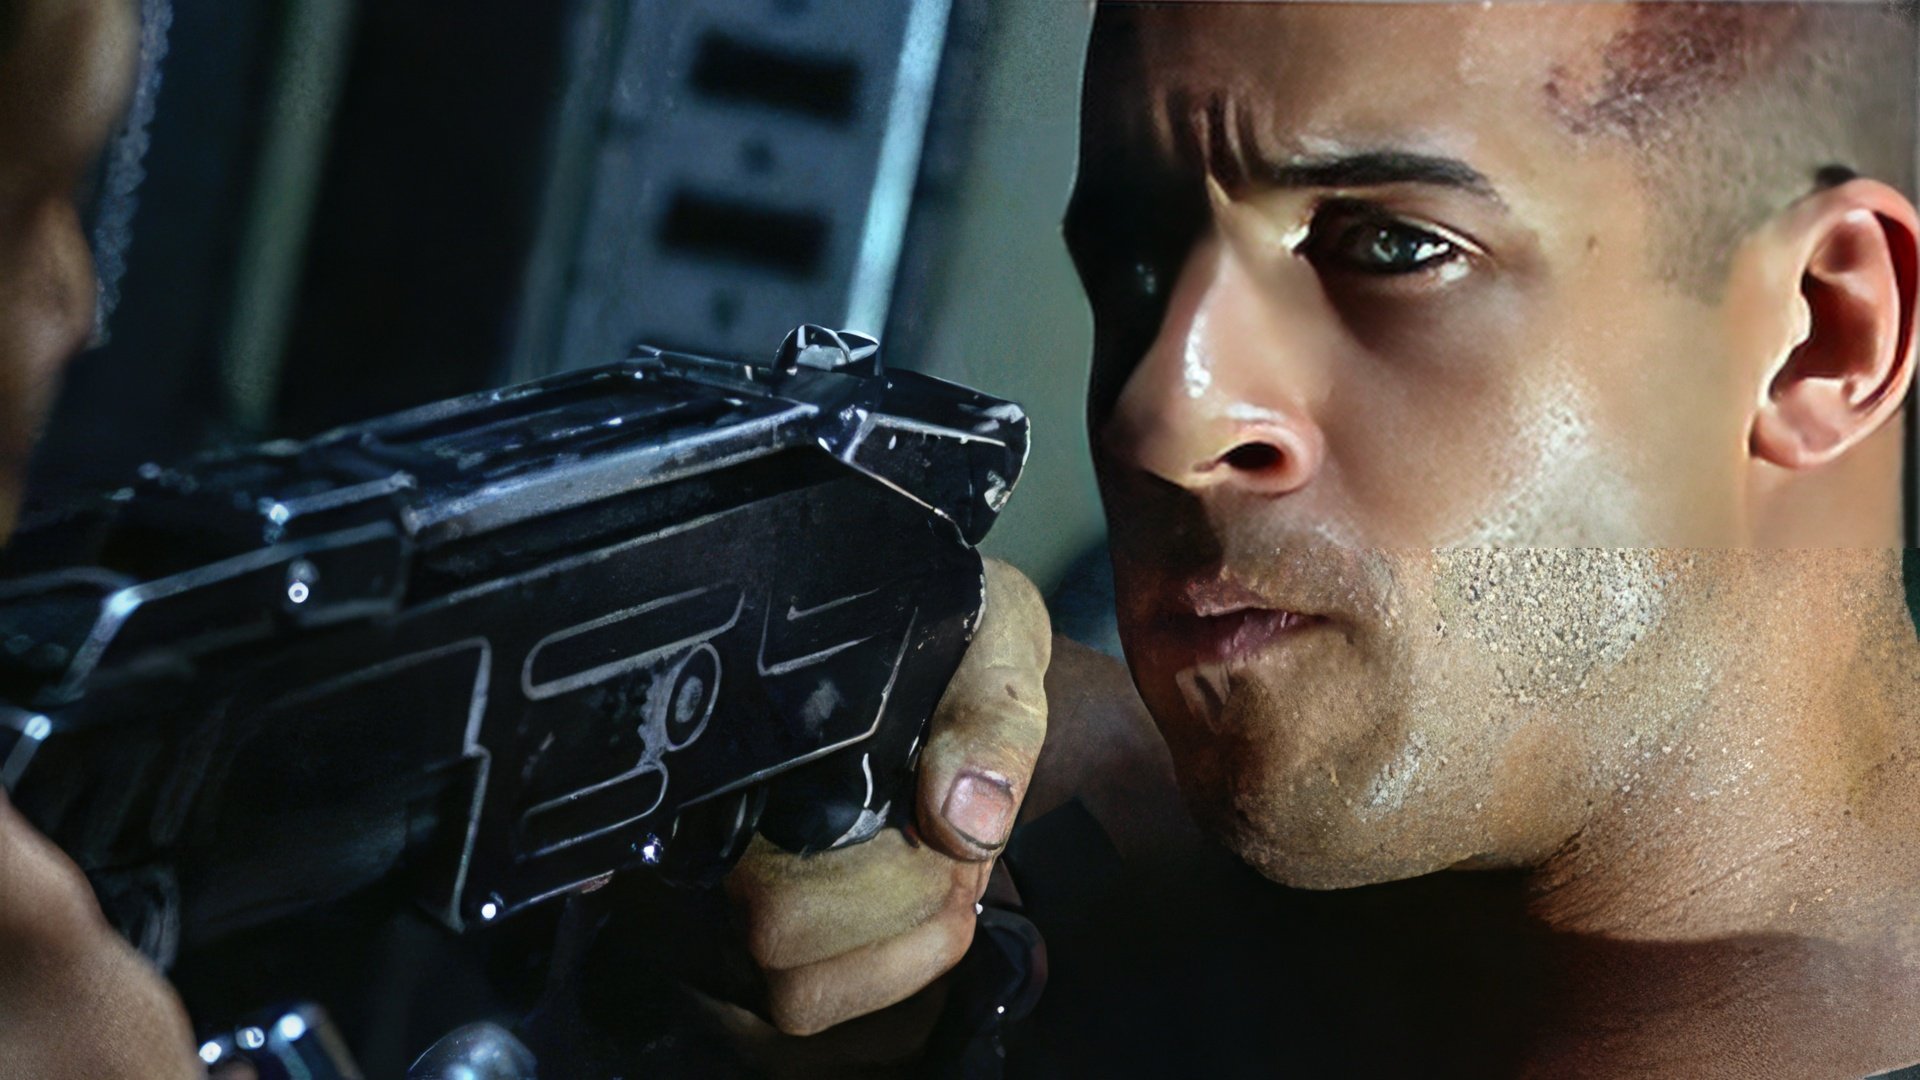 Riddick became one of Diesel's most famous characters